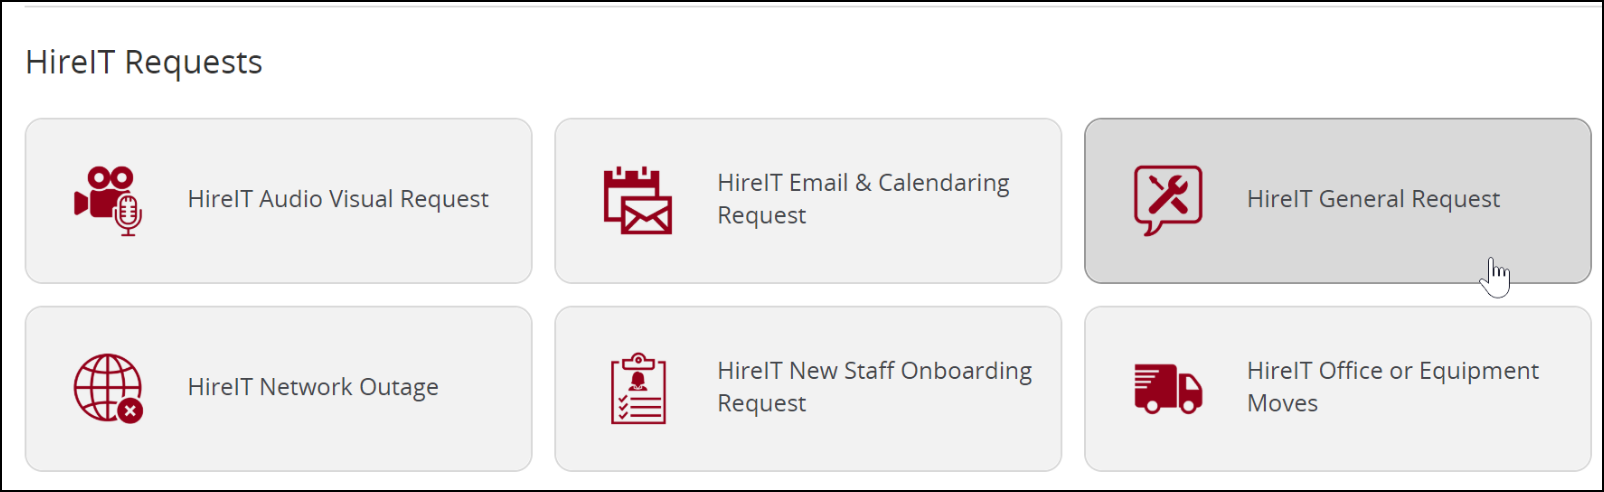 If you can't find your specific request, a General Request is an option.